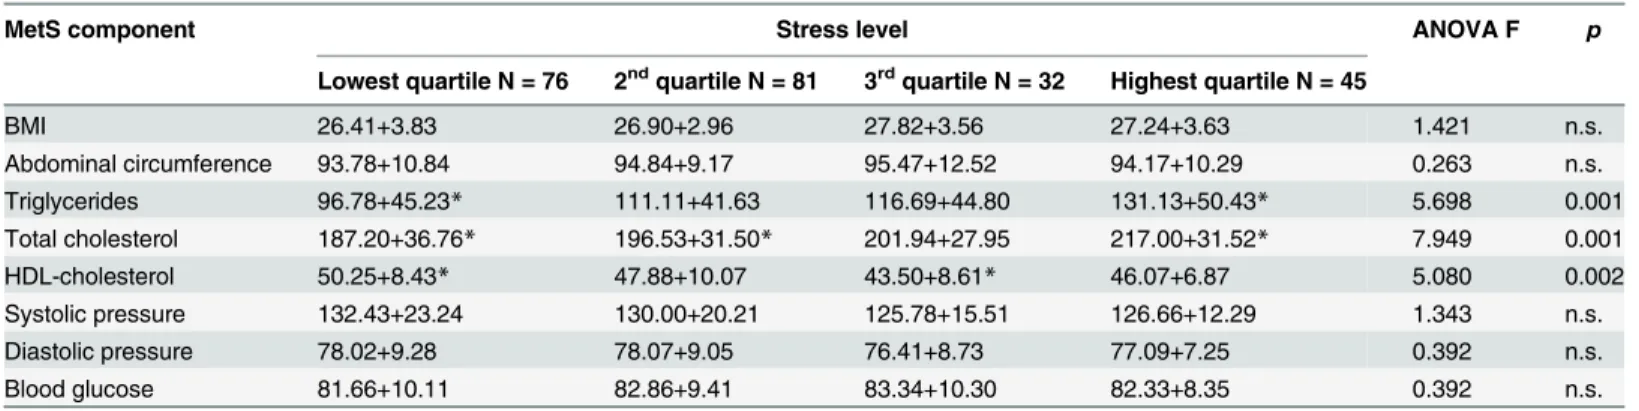 Table 2. Difference between groups exposed to different levels of work stress.